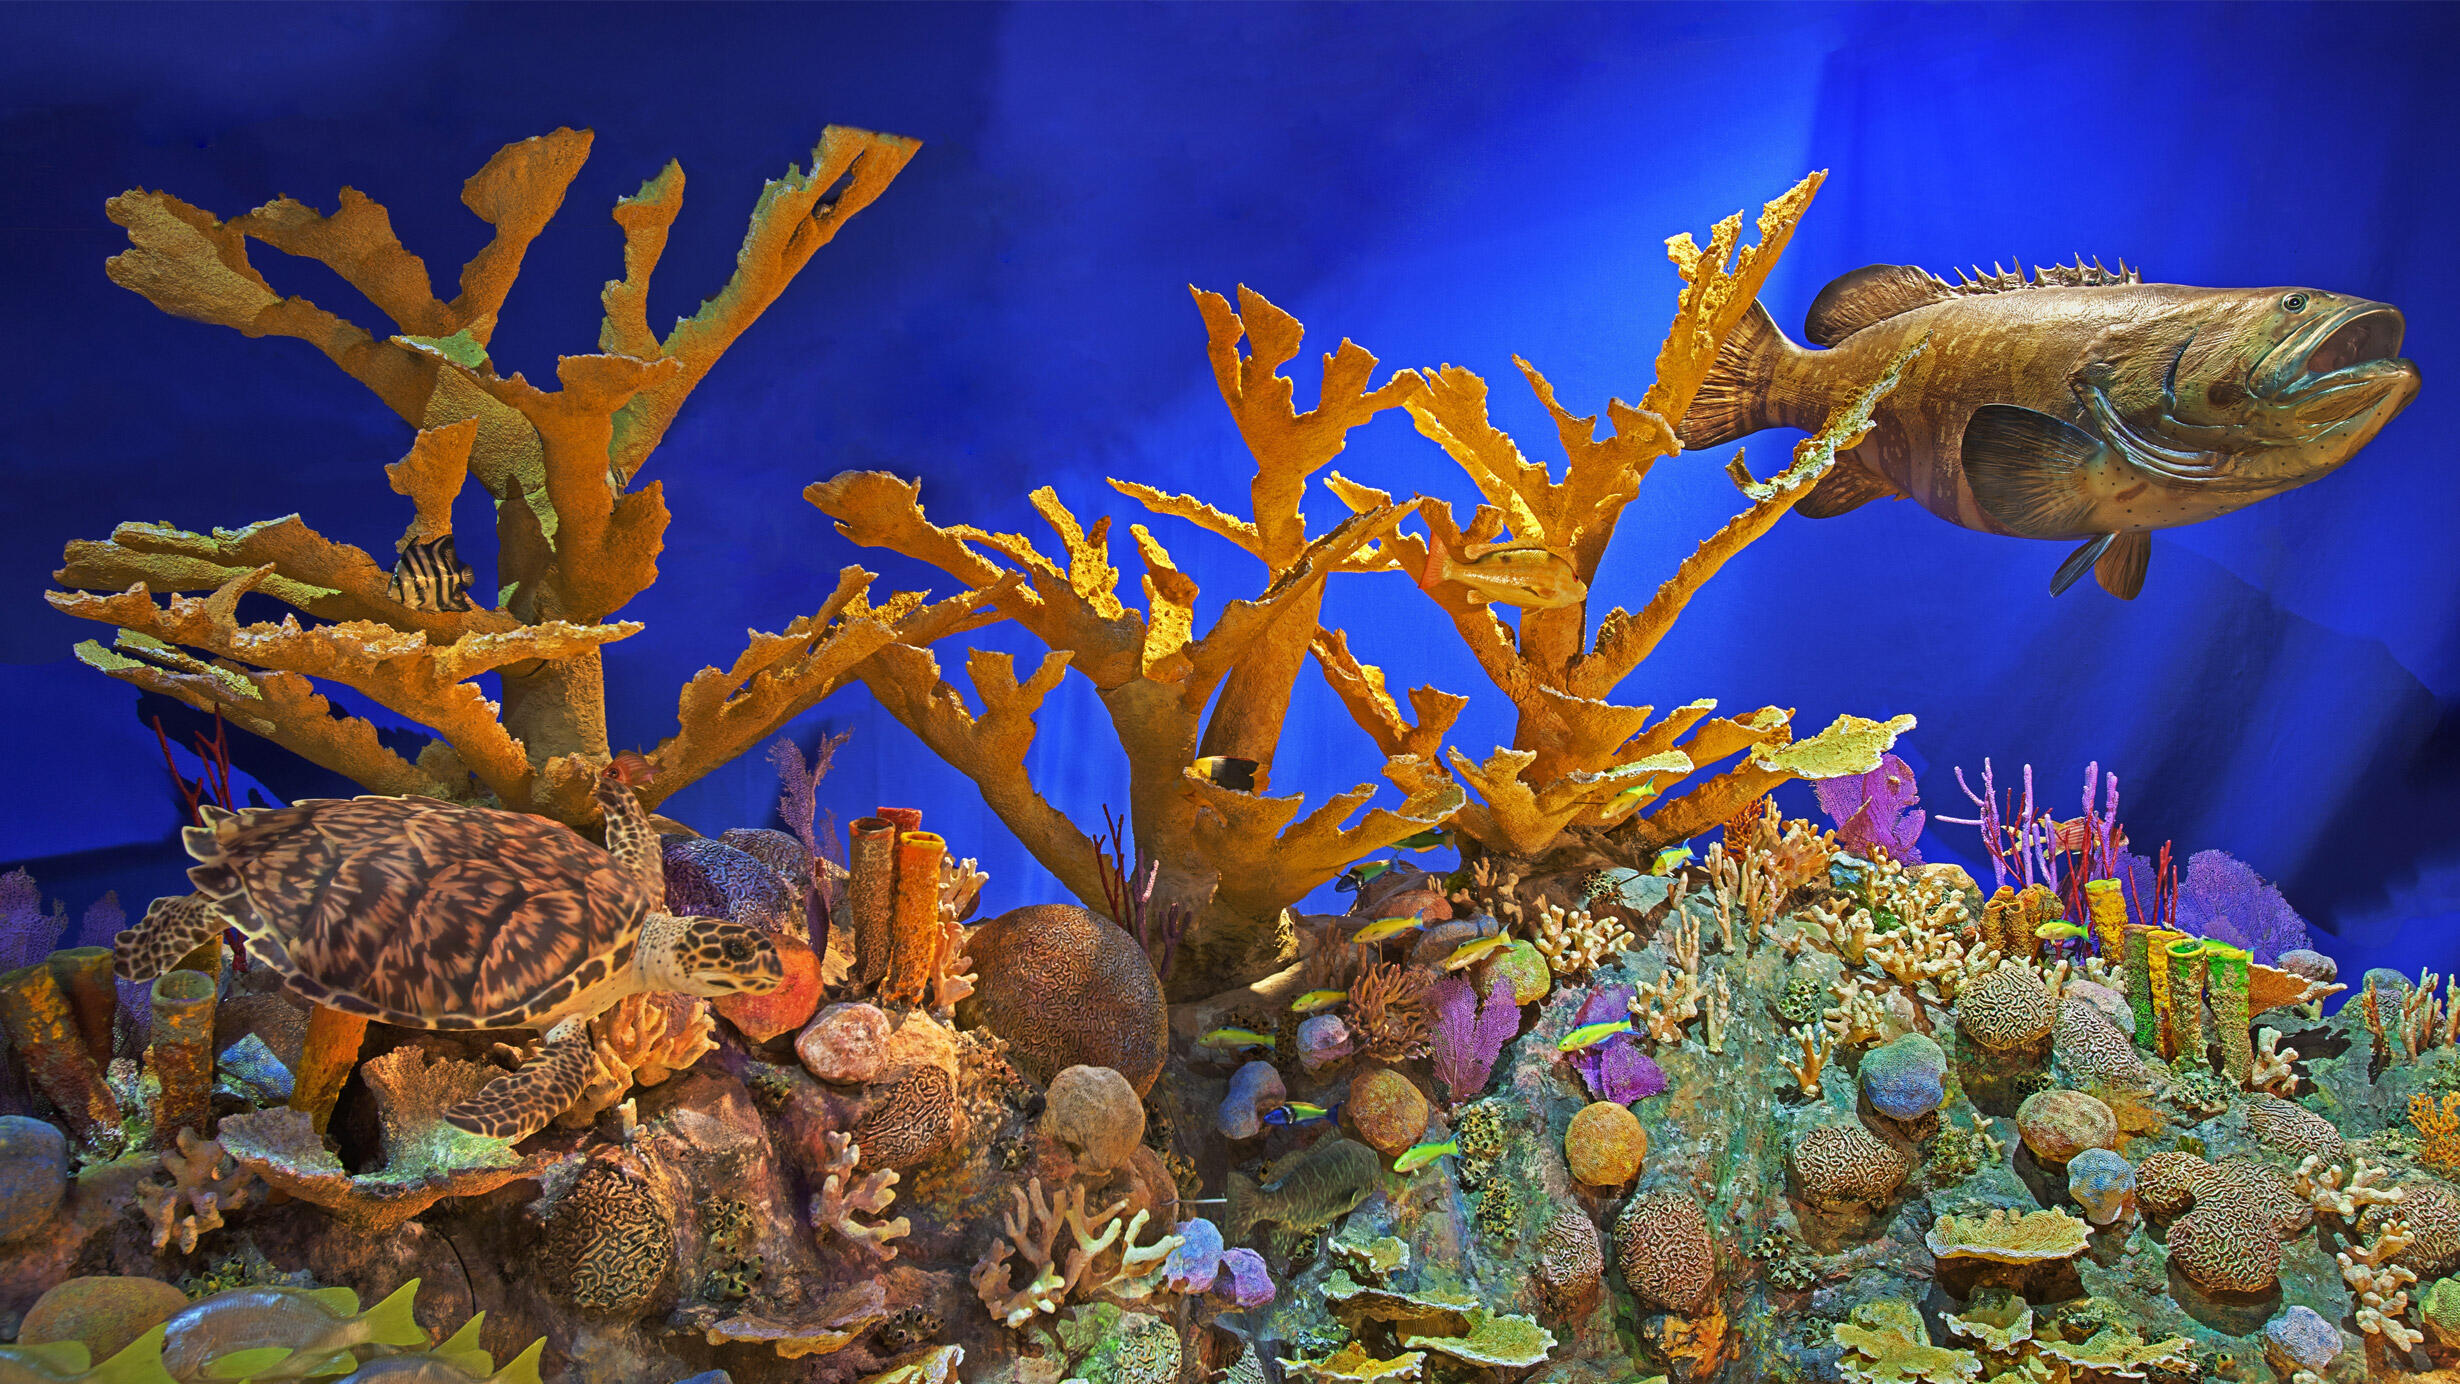 Close-up of a coral reef diorama featuring models of a hawksbill sea turtle and fish